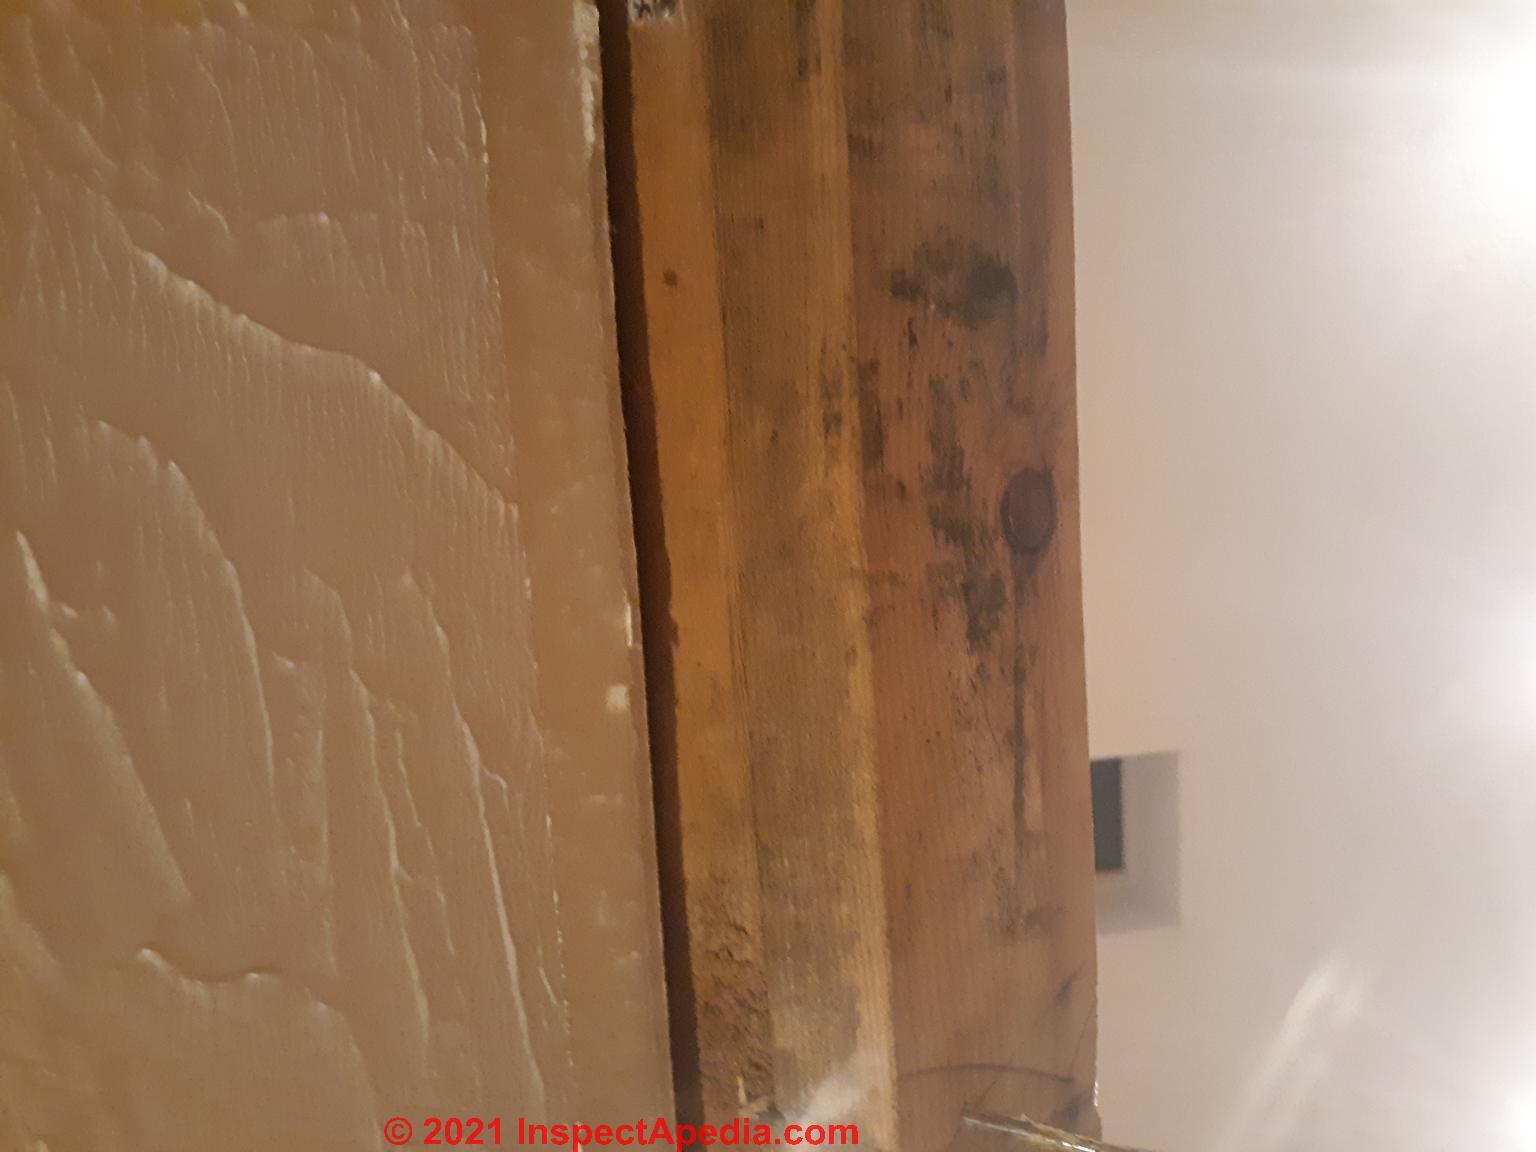 How to Clean Mold on Building Framing Lumber or Plywood Sheathing